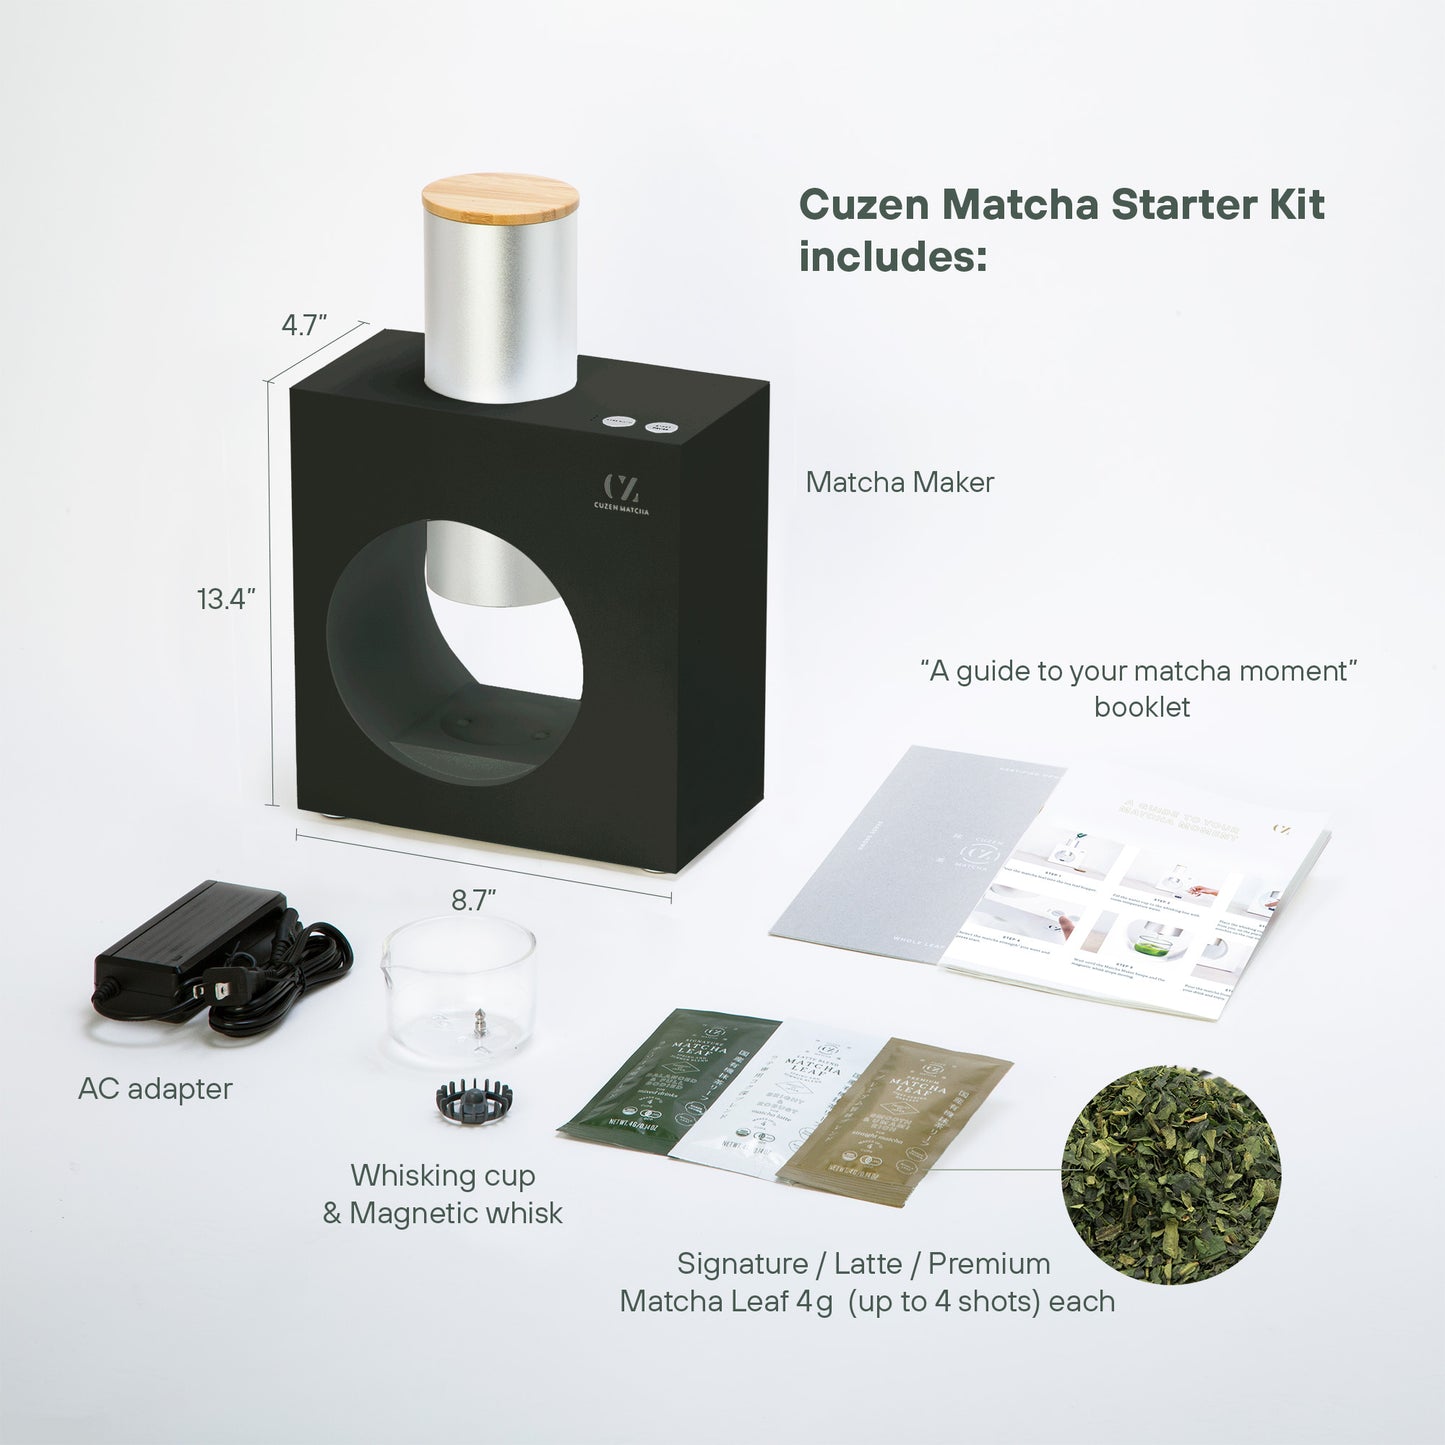 Visual of included items, with dimensions: Matcha Maker, AC adapter, cup & magnetic whisk, 3 Matcha Leaf sample packets.